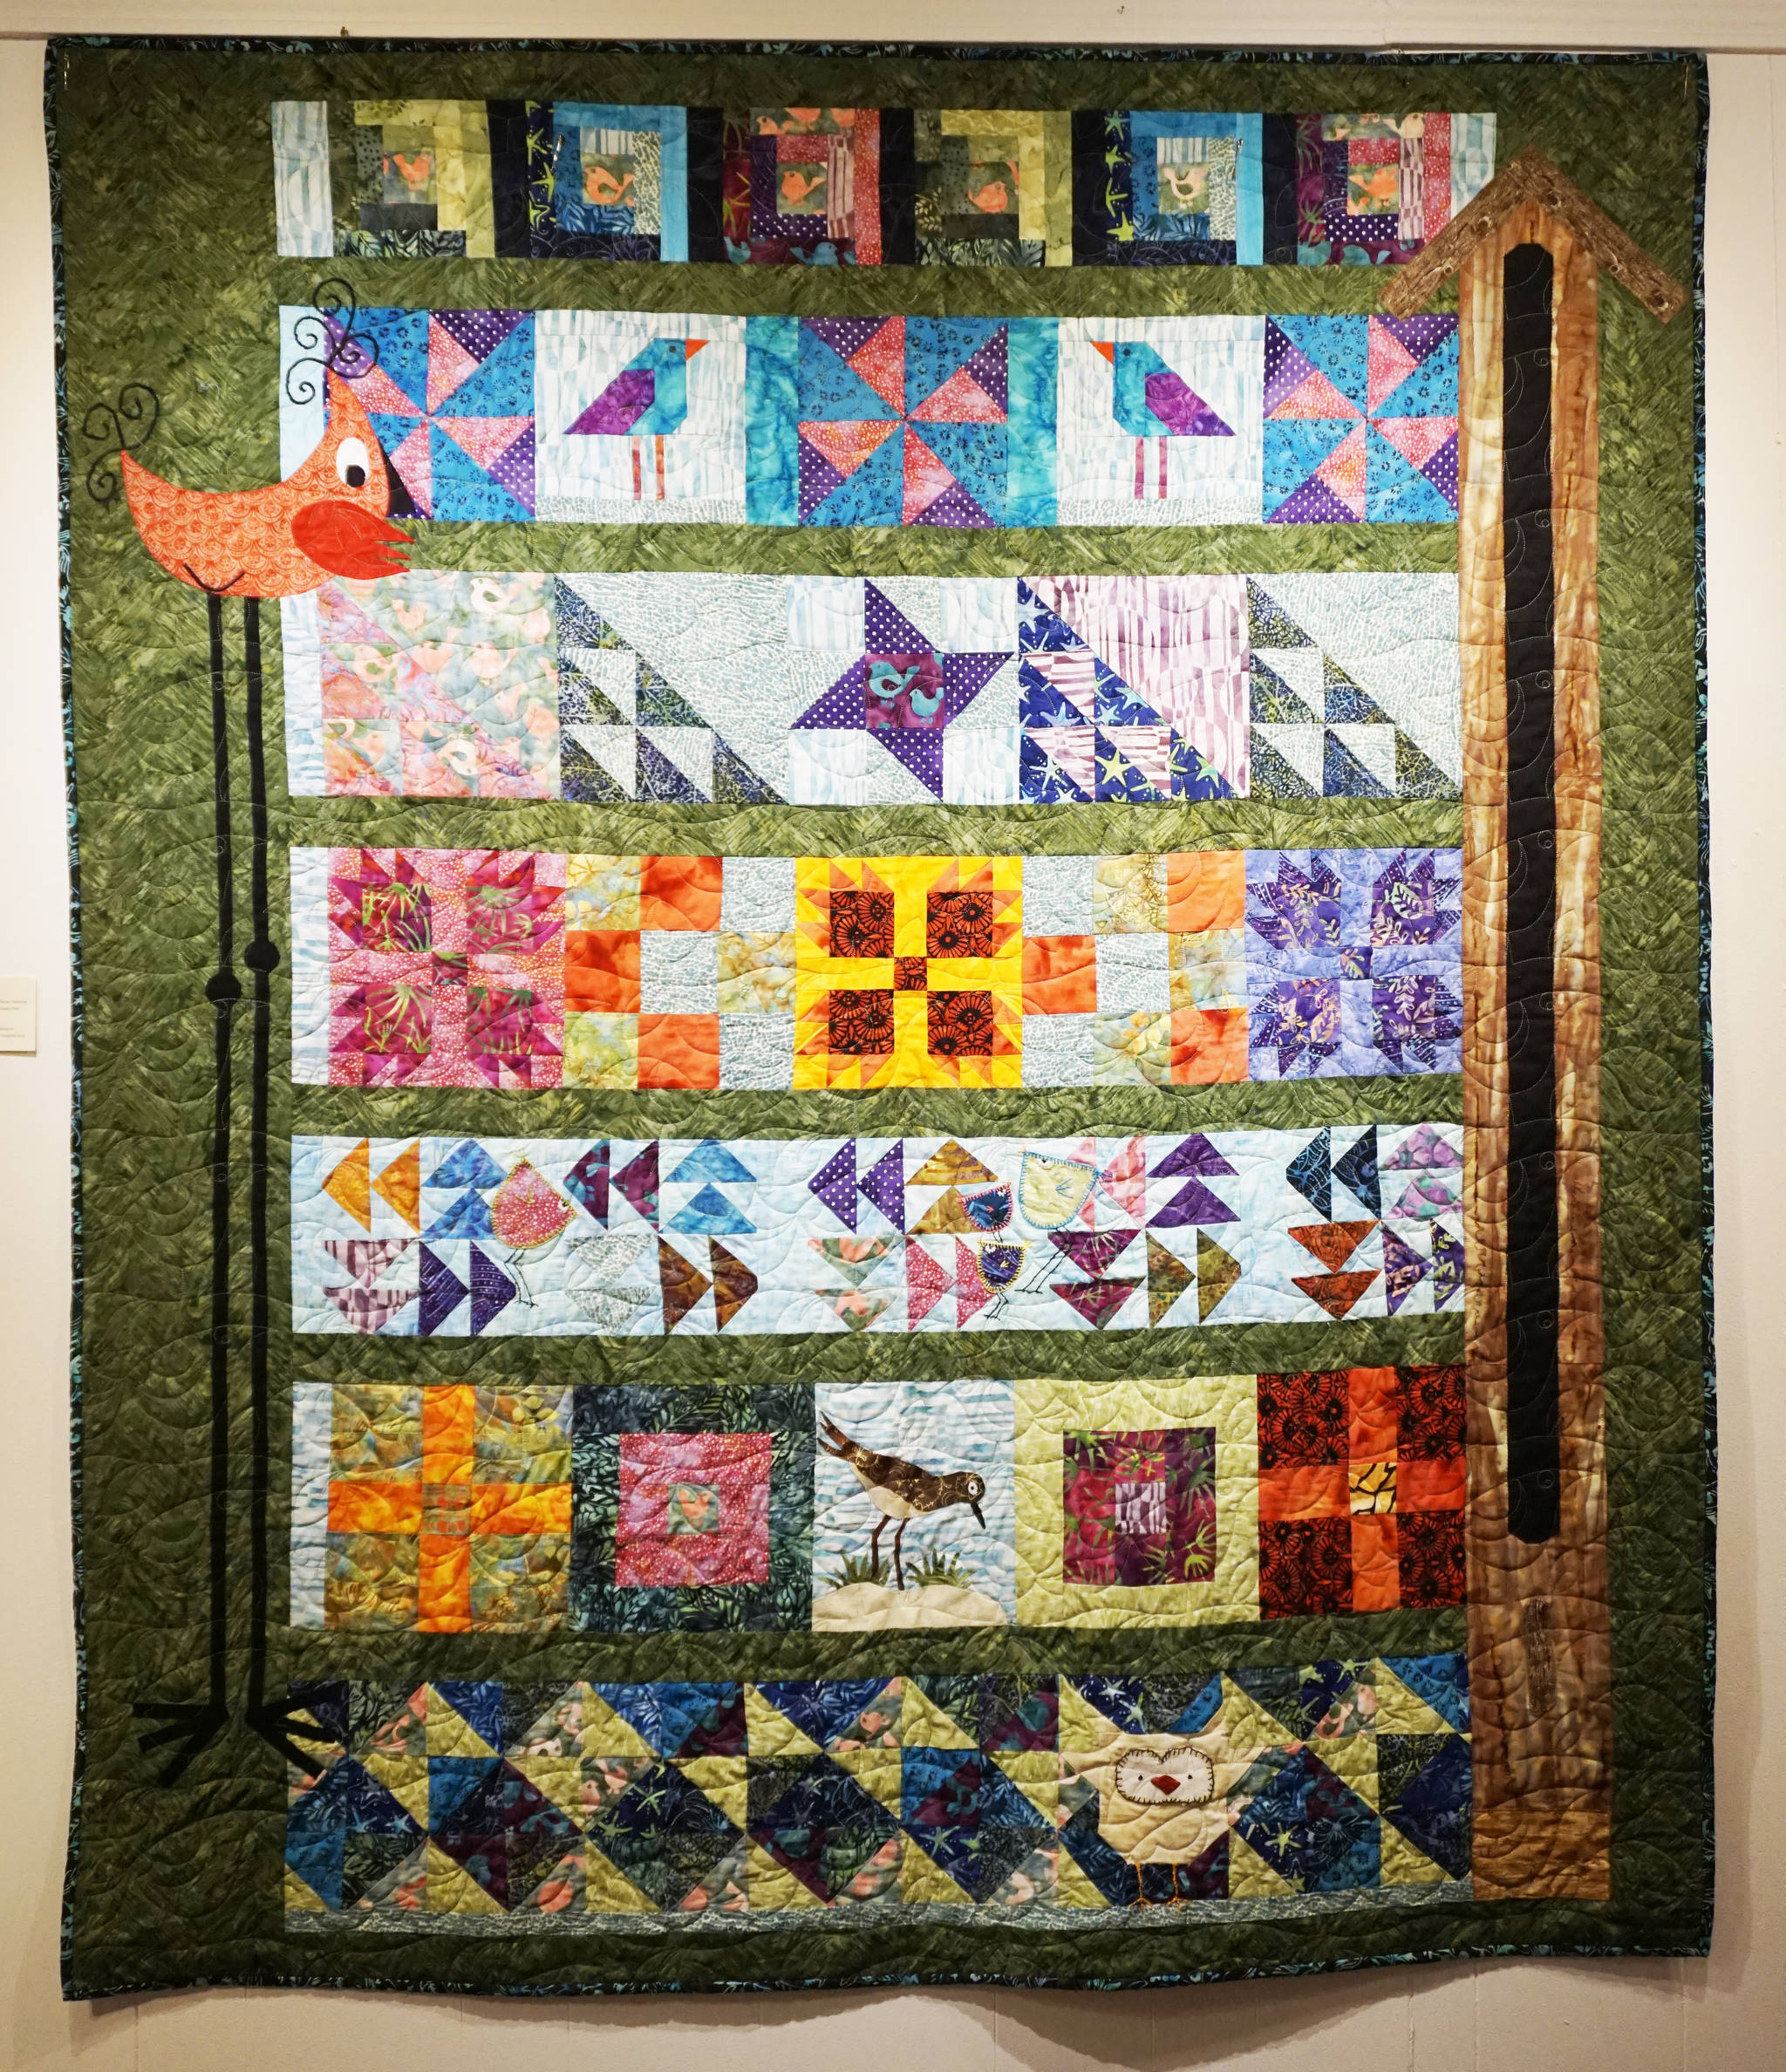 Janet Bacher’s “Birds in Flight” quilt, one of the works in the “9 Women / 9 Quilts” show that opened last Friday, Feb. 1, 2019, at the Homer Council on the Arts, in Homer, Alaska. (Photo by Michael Armstrong/Homer News)